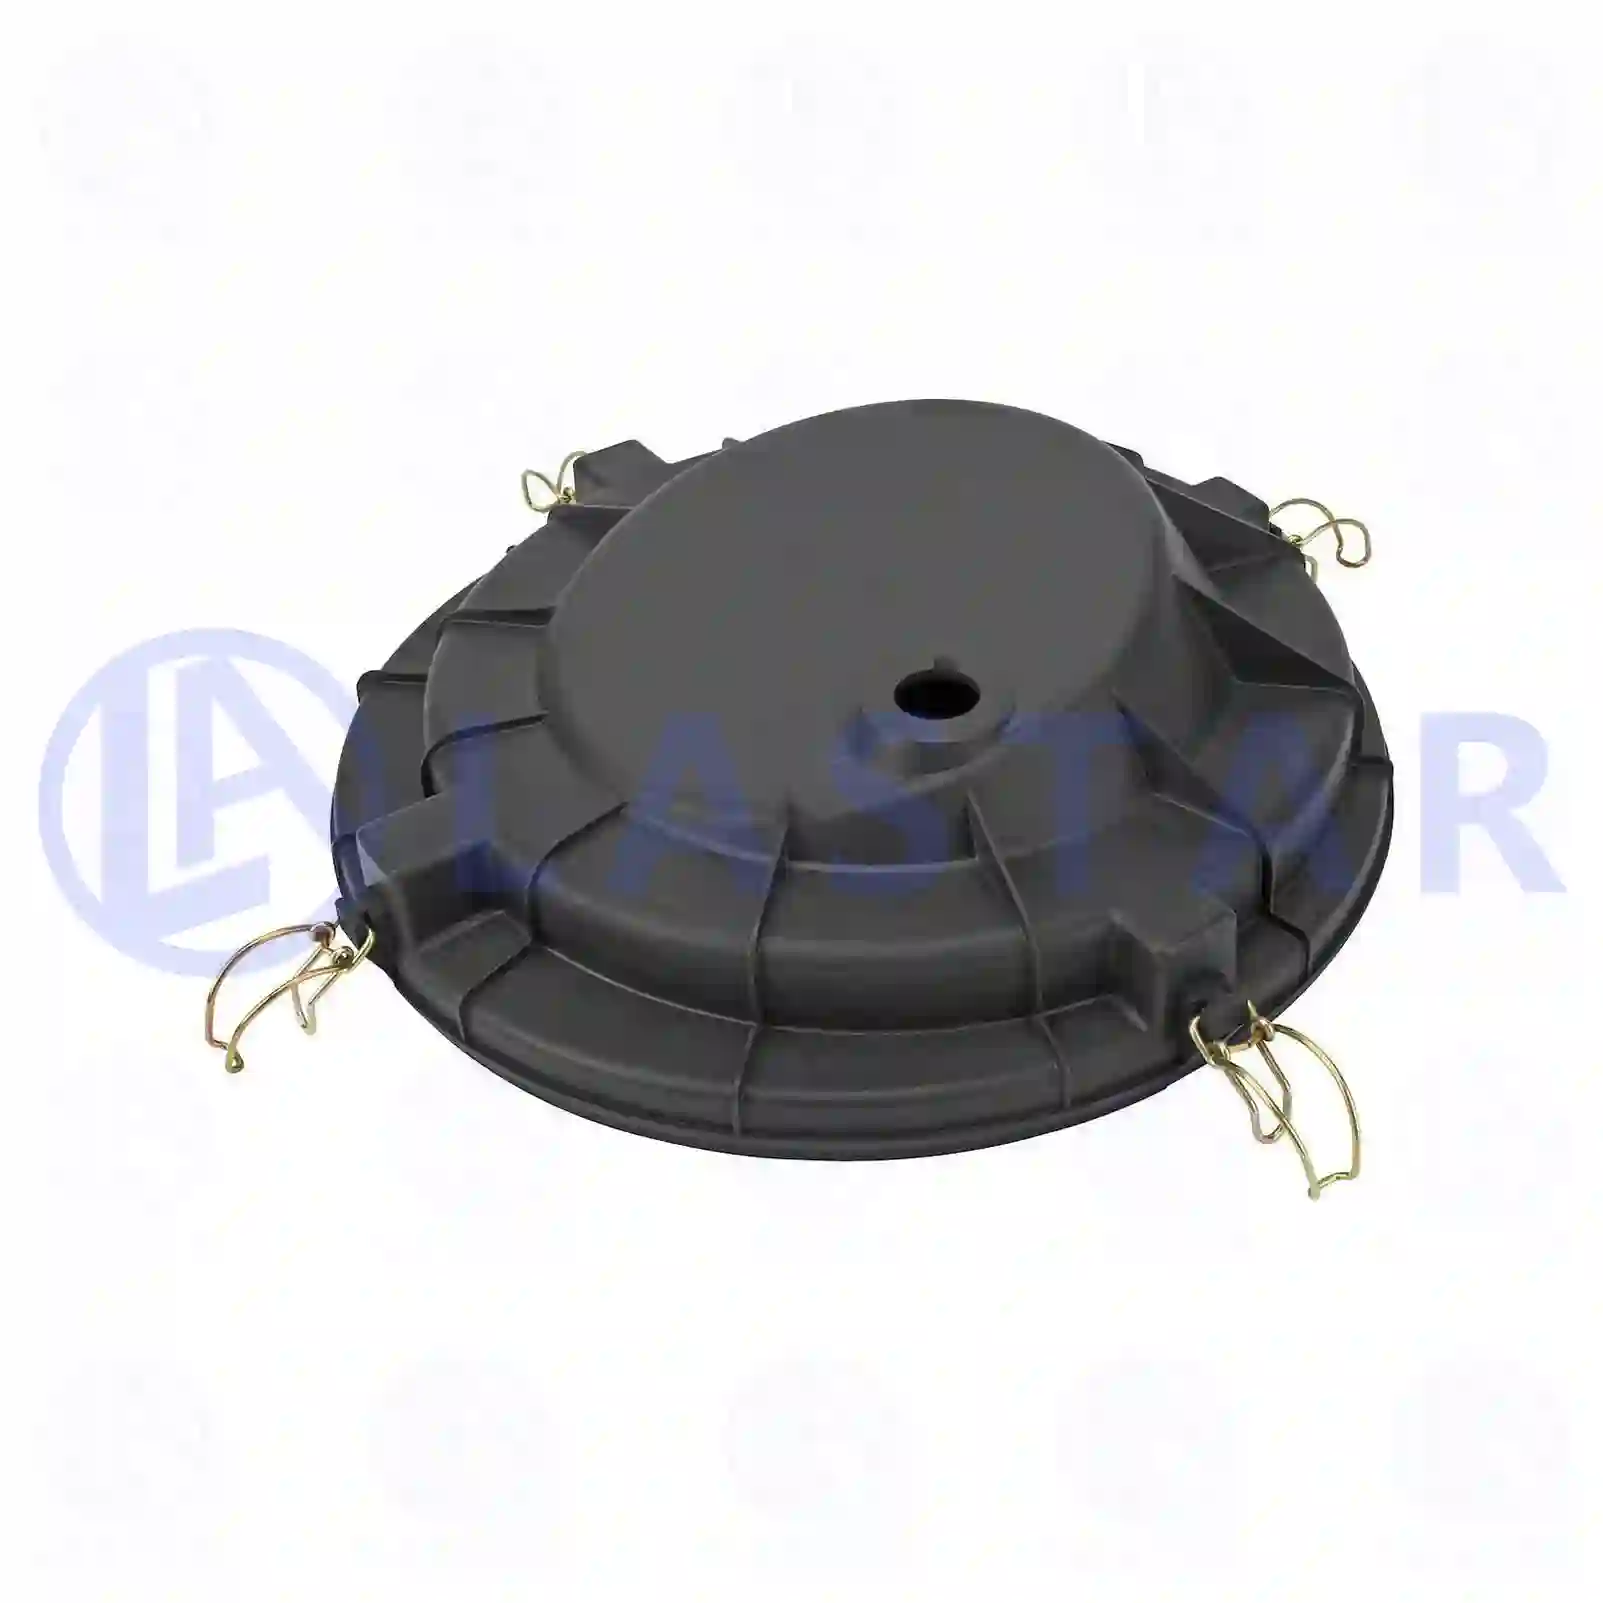 Air filter cover, 77707038, 1335677, ZG00909-0008 ||  77707038 Lastar Spare Part | Truck Spare Parts, Auotomotive Spare Parts Air filter cover, 77707038, 1335677, ZG00909-0008 ||  77707038 Lastar Spare Part | Truck Spare Parts, Auotomotive Spare Parts